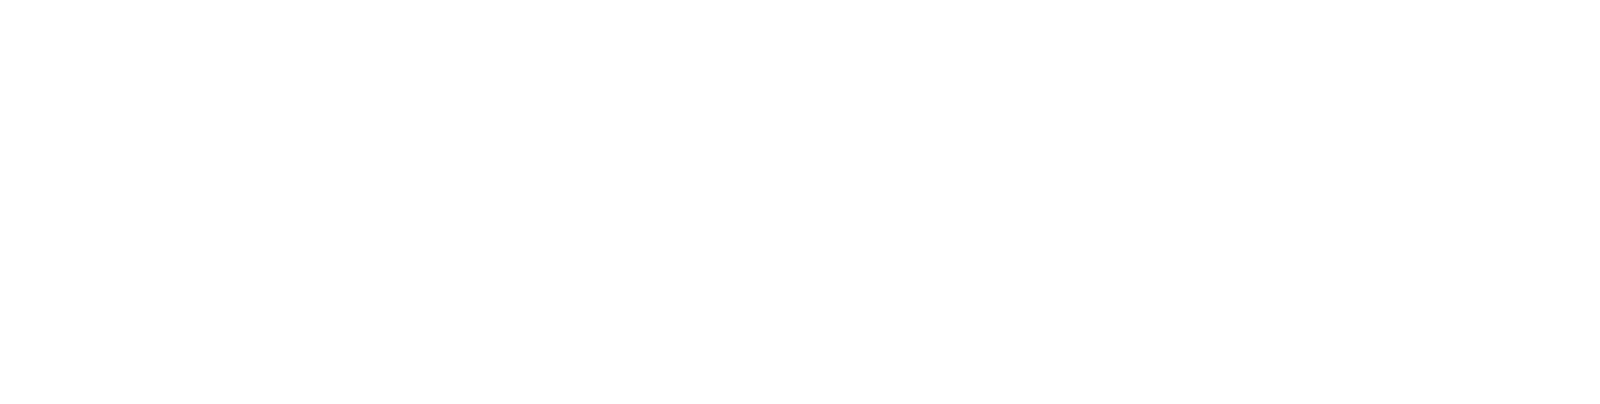 battle for giostone logo.png